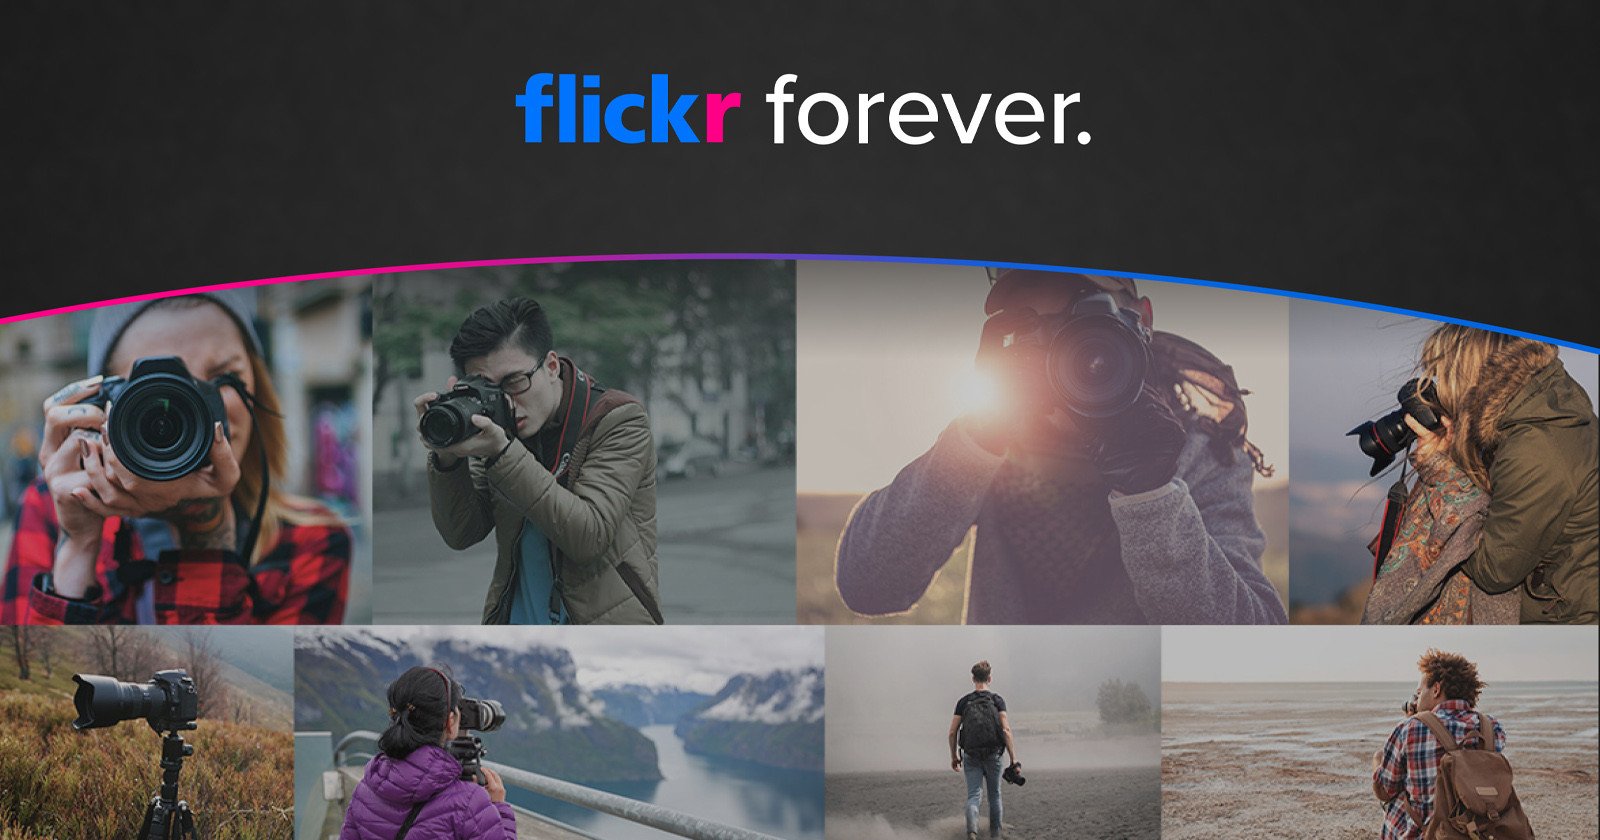  stop calling porn flickr embraces artistic nsfw content 